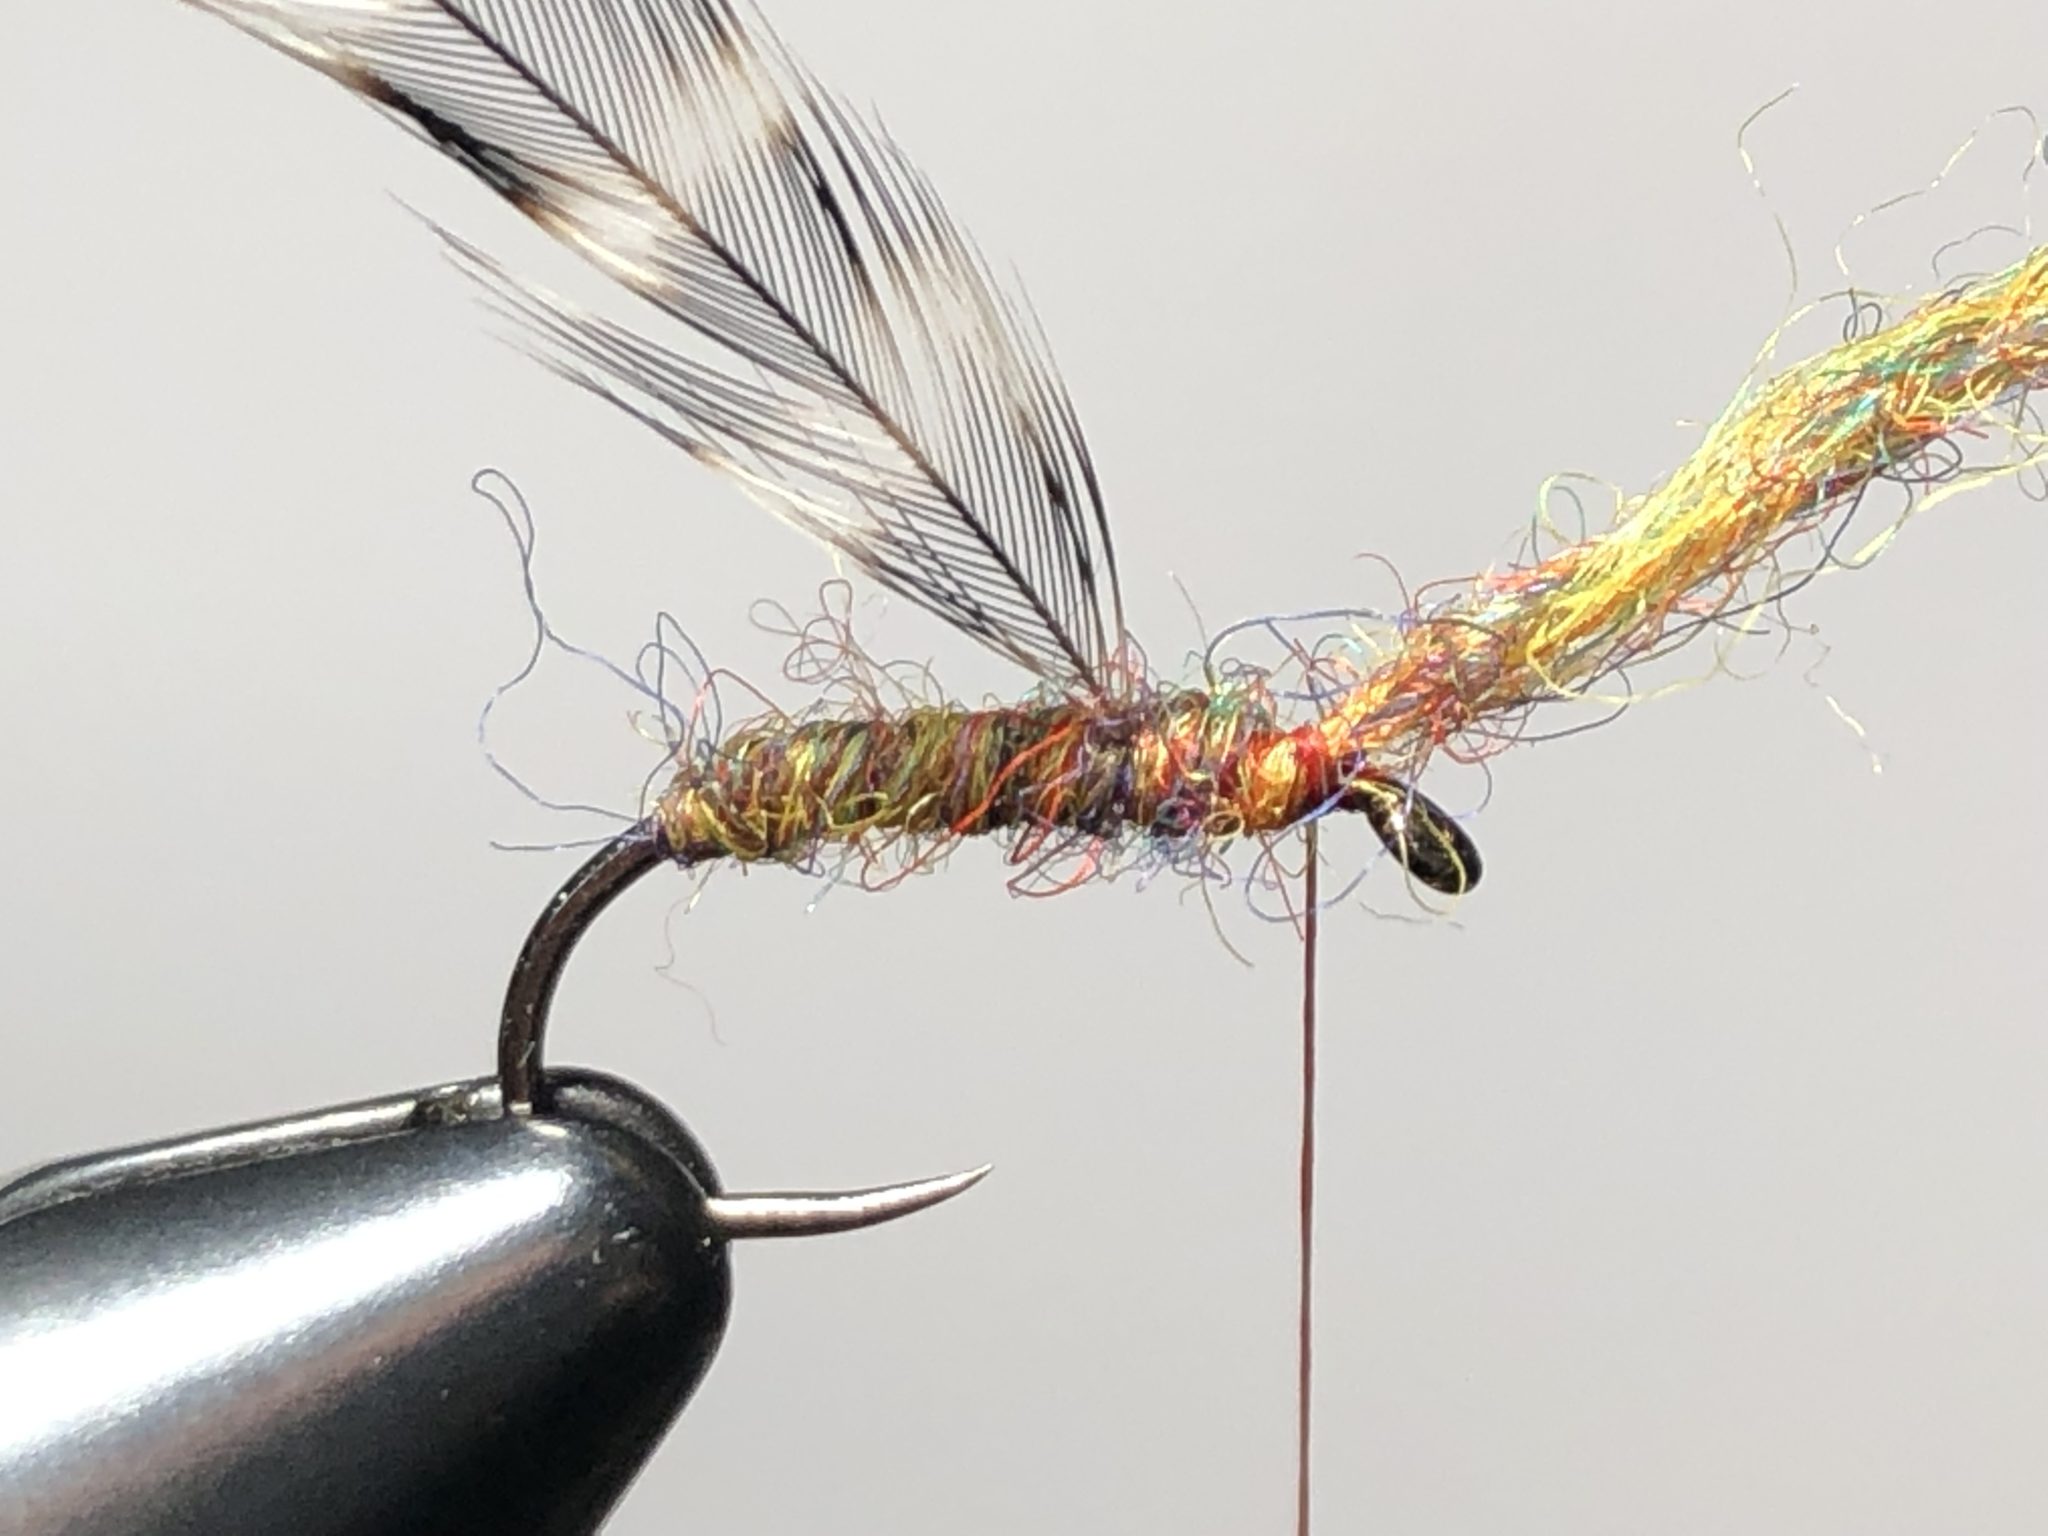 Fly Tying for Beginners: Why You Should Tie and How to Start